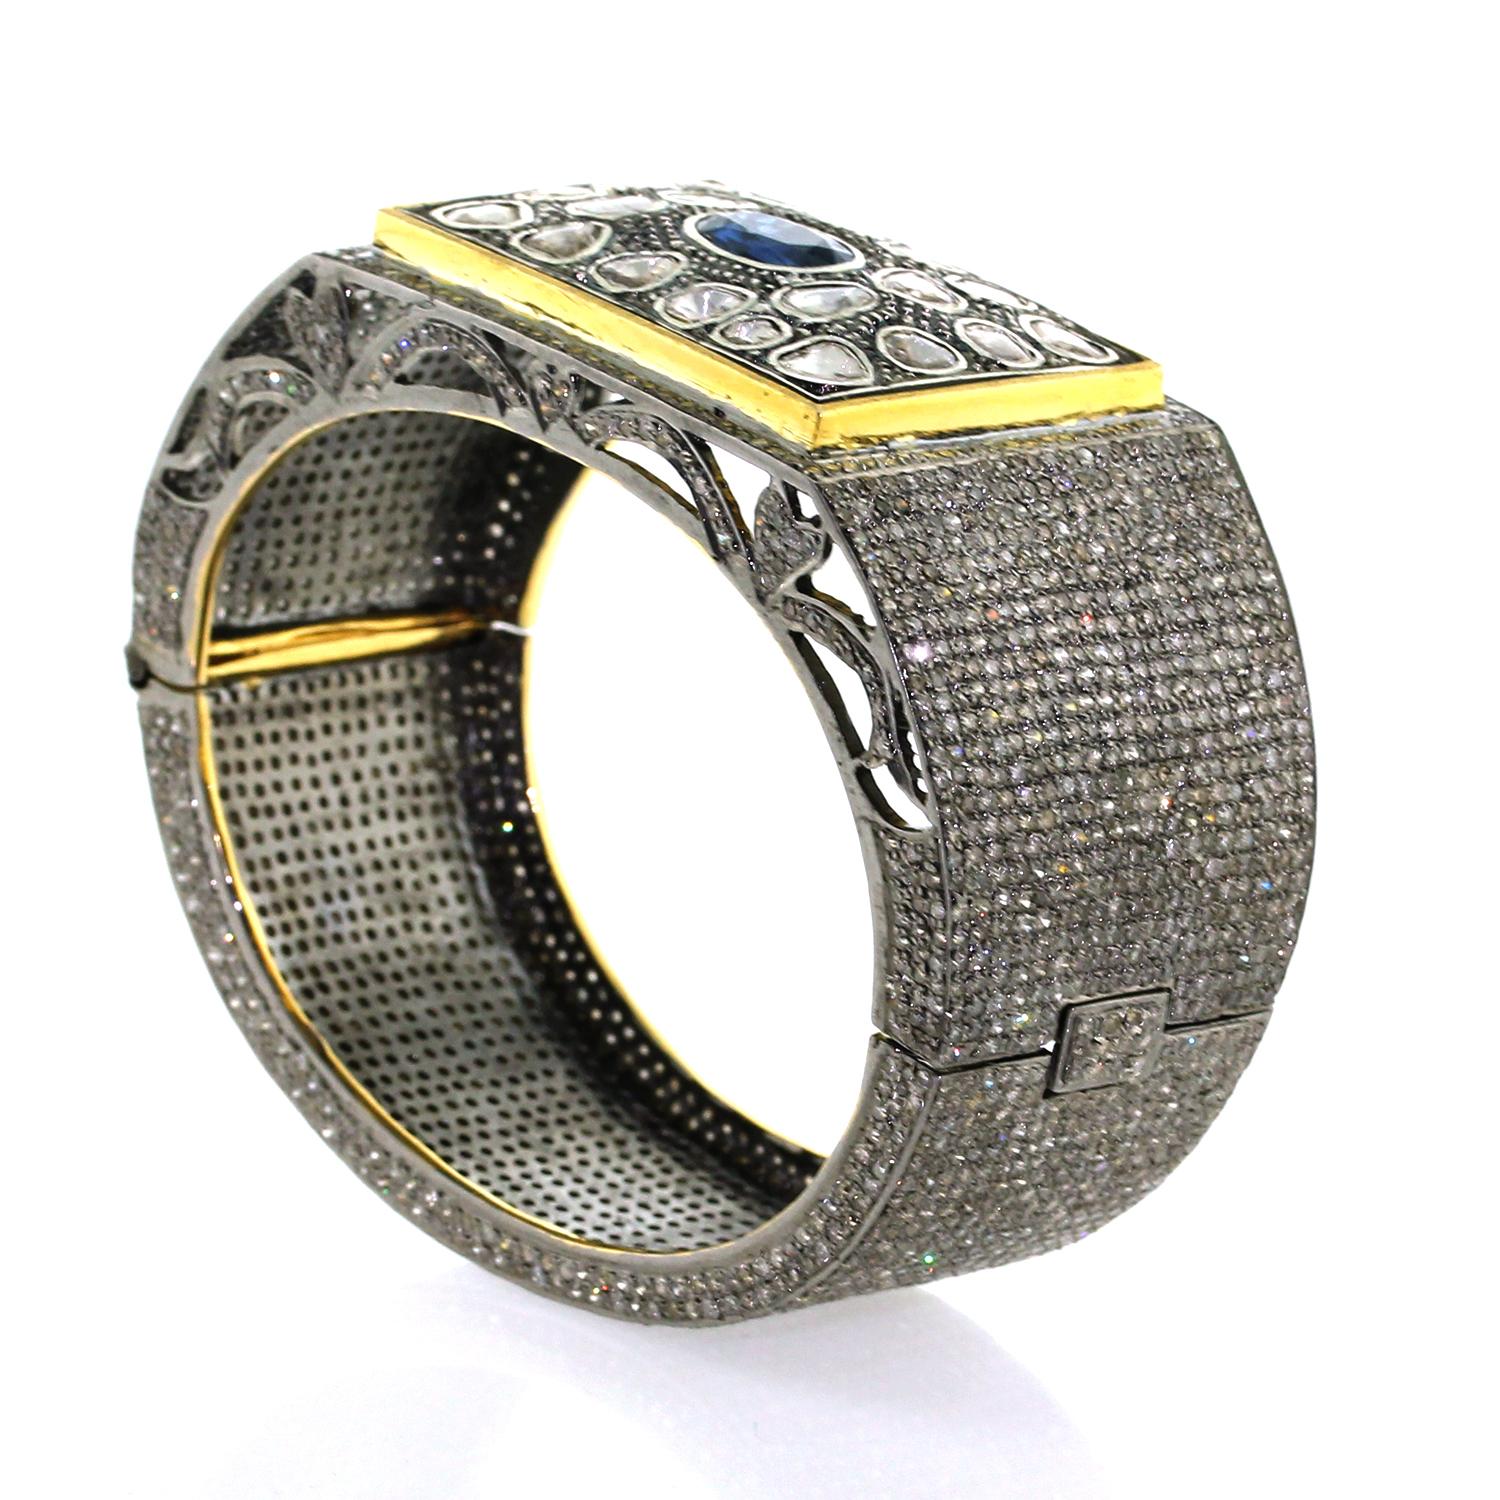 Artisan Rose Cut Diamond & Blue Sapphire Cuff Made In 18k yellow Gold For Sale